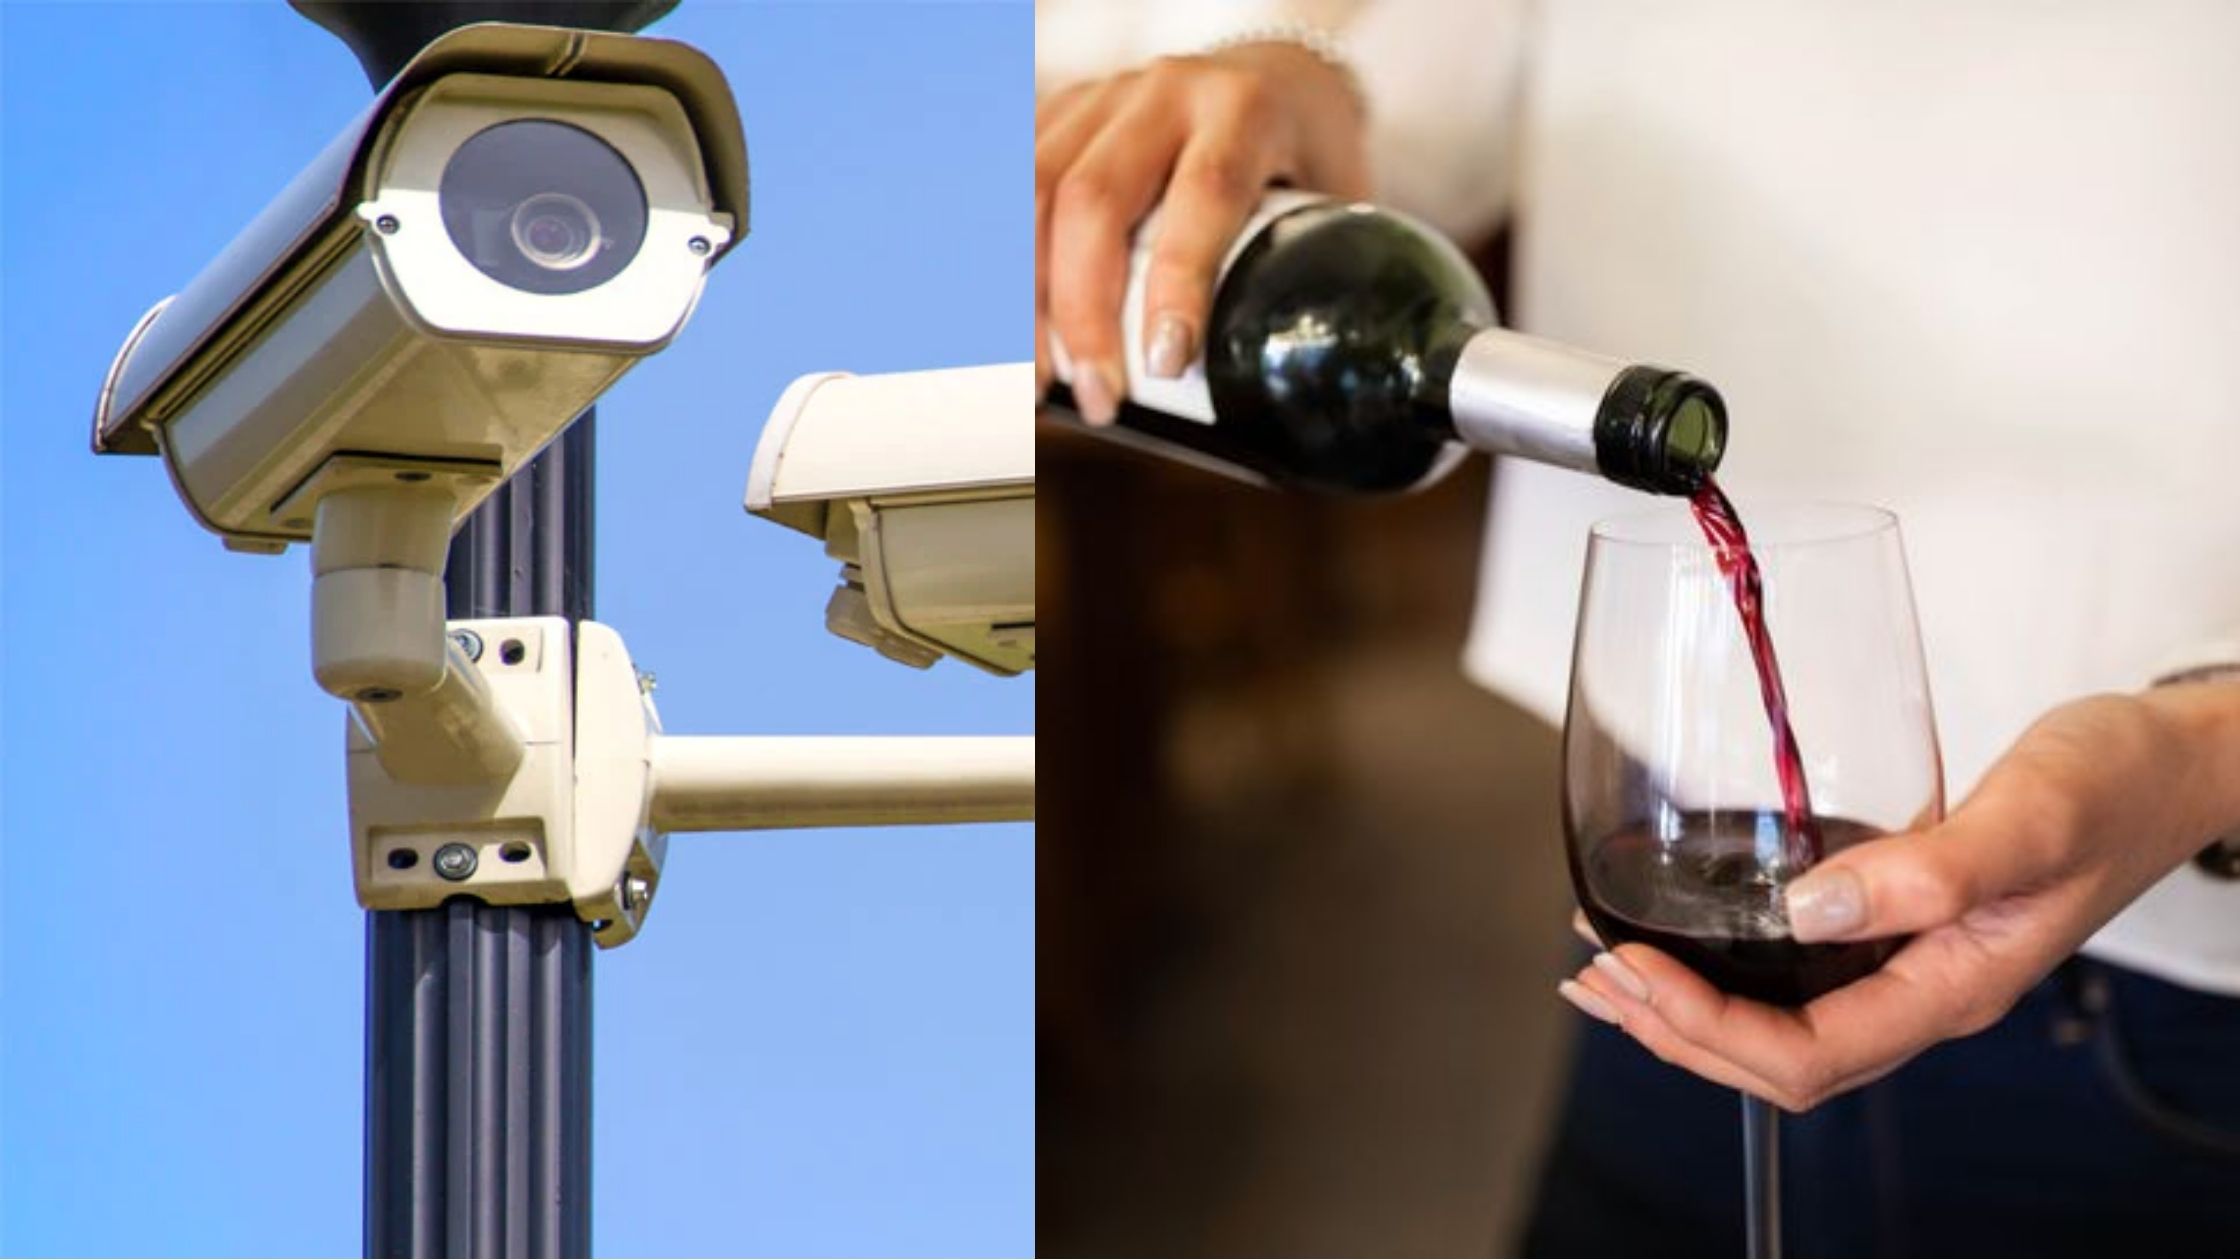 Bihar is the first state where CCTV cameras will be installed for prohibition